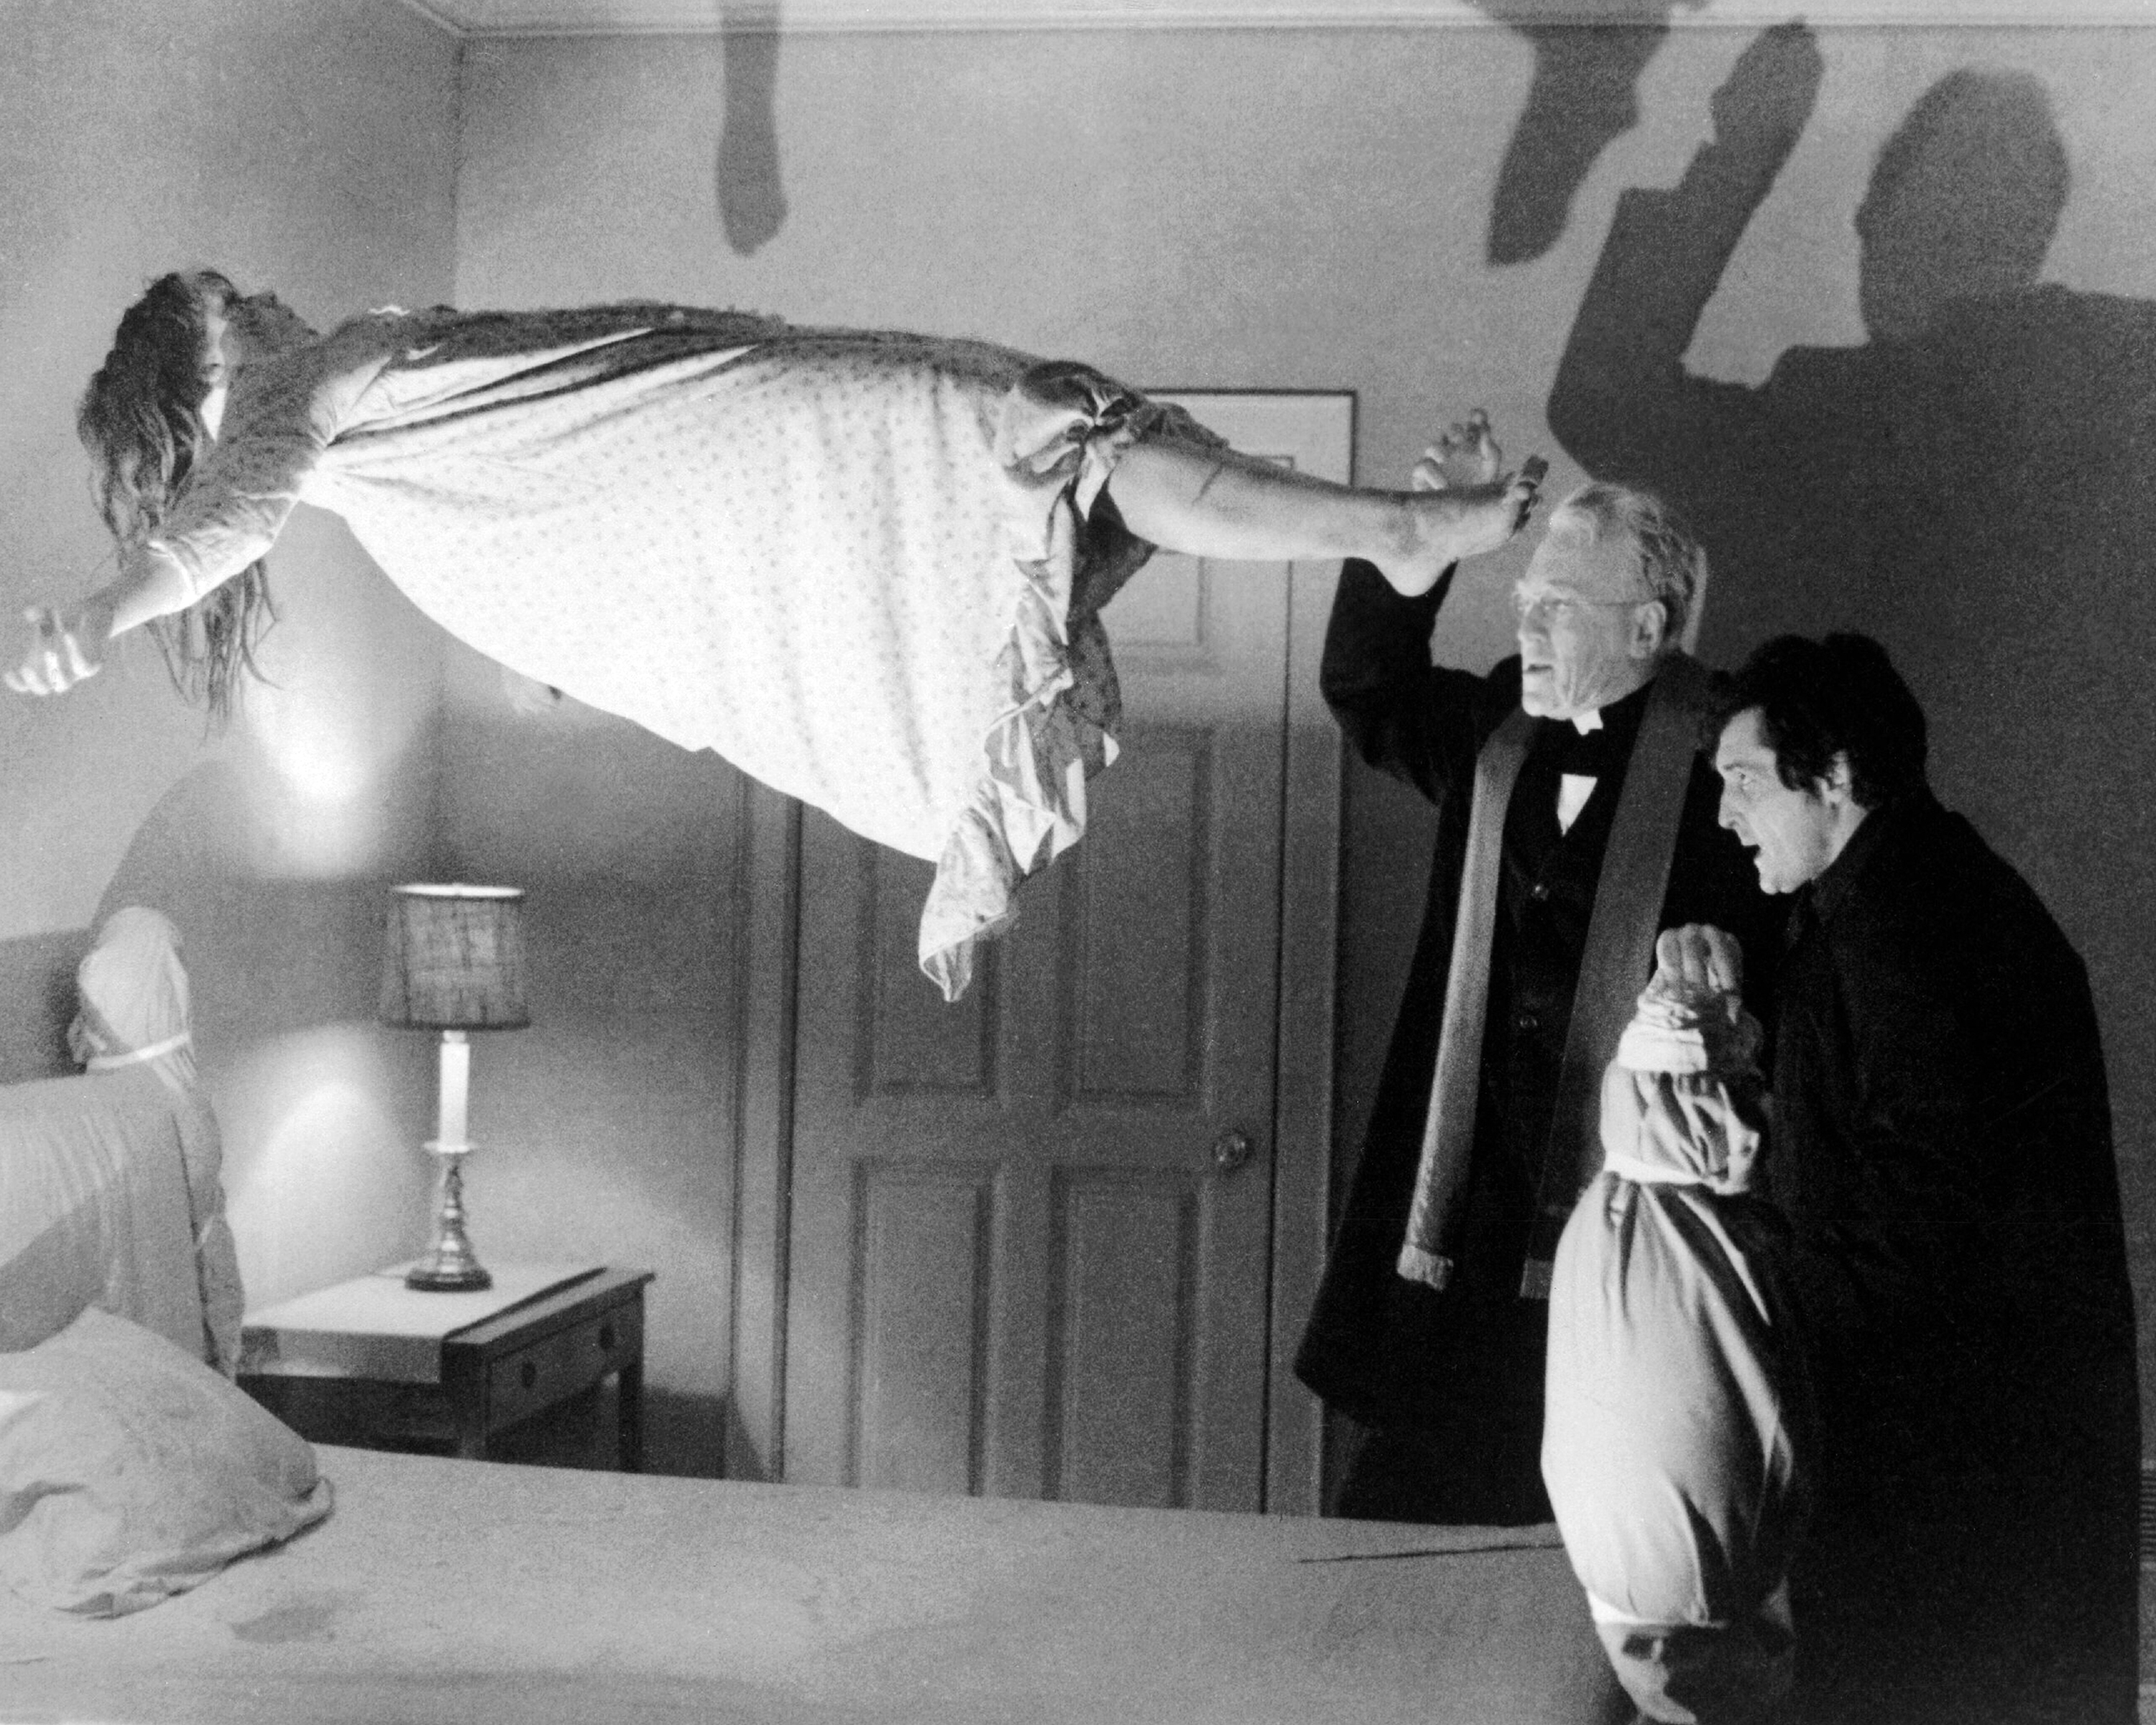 A scene from 'The Exorcist' (Silver Screen Collection&mdash;Getty Images)